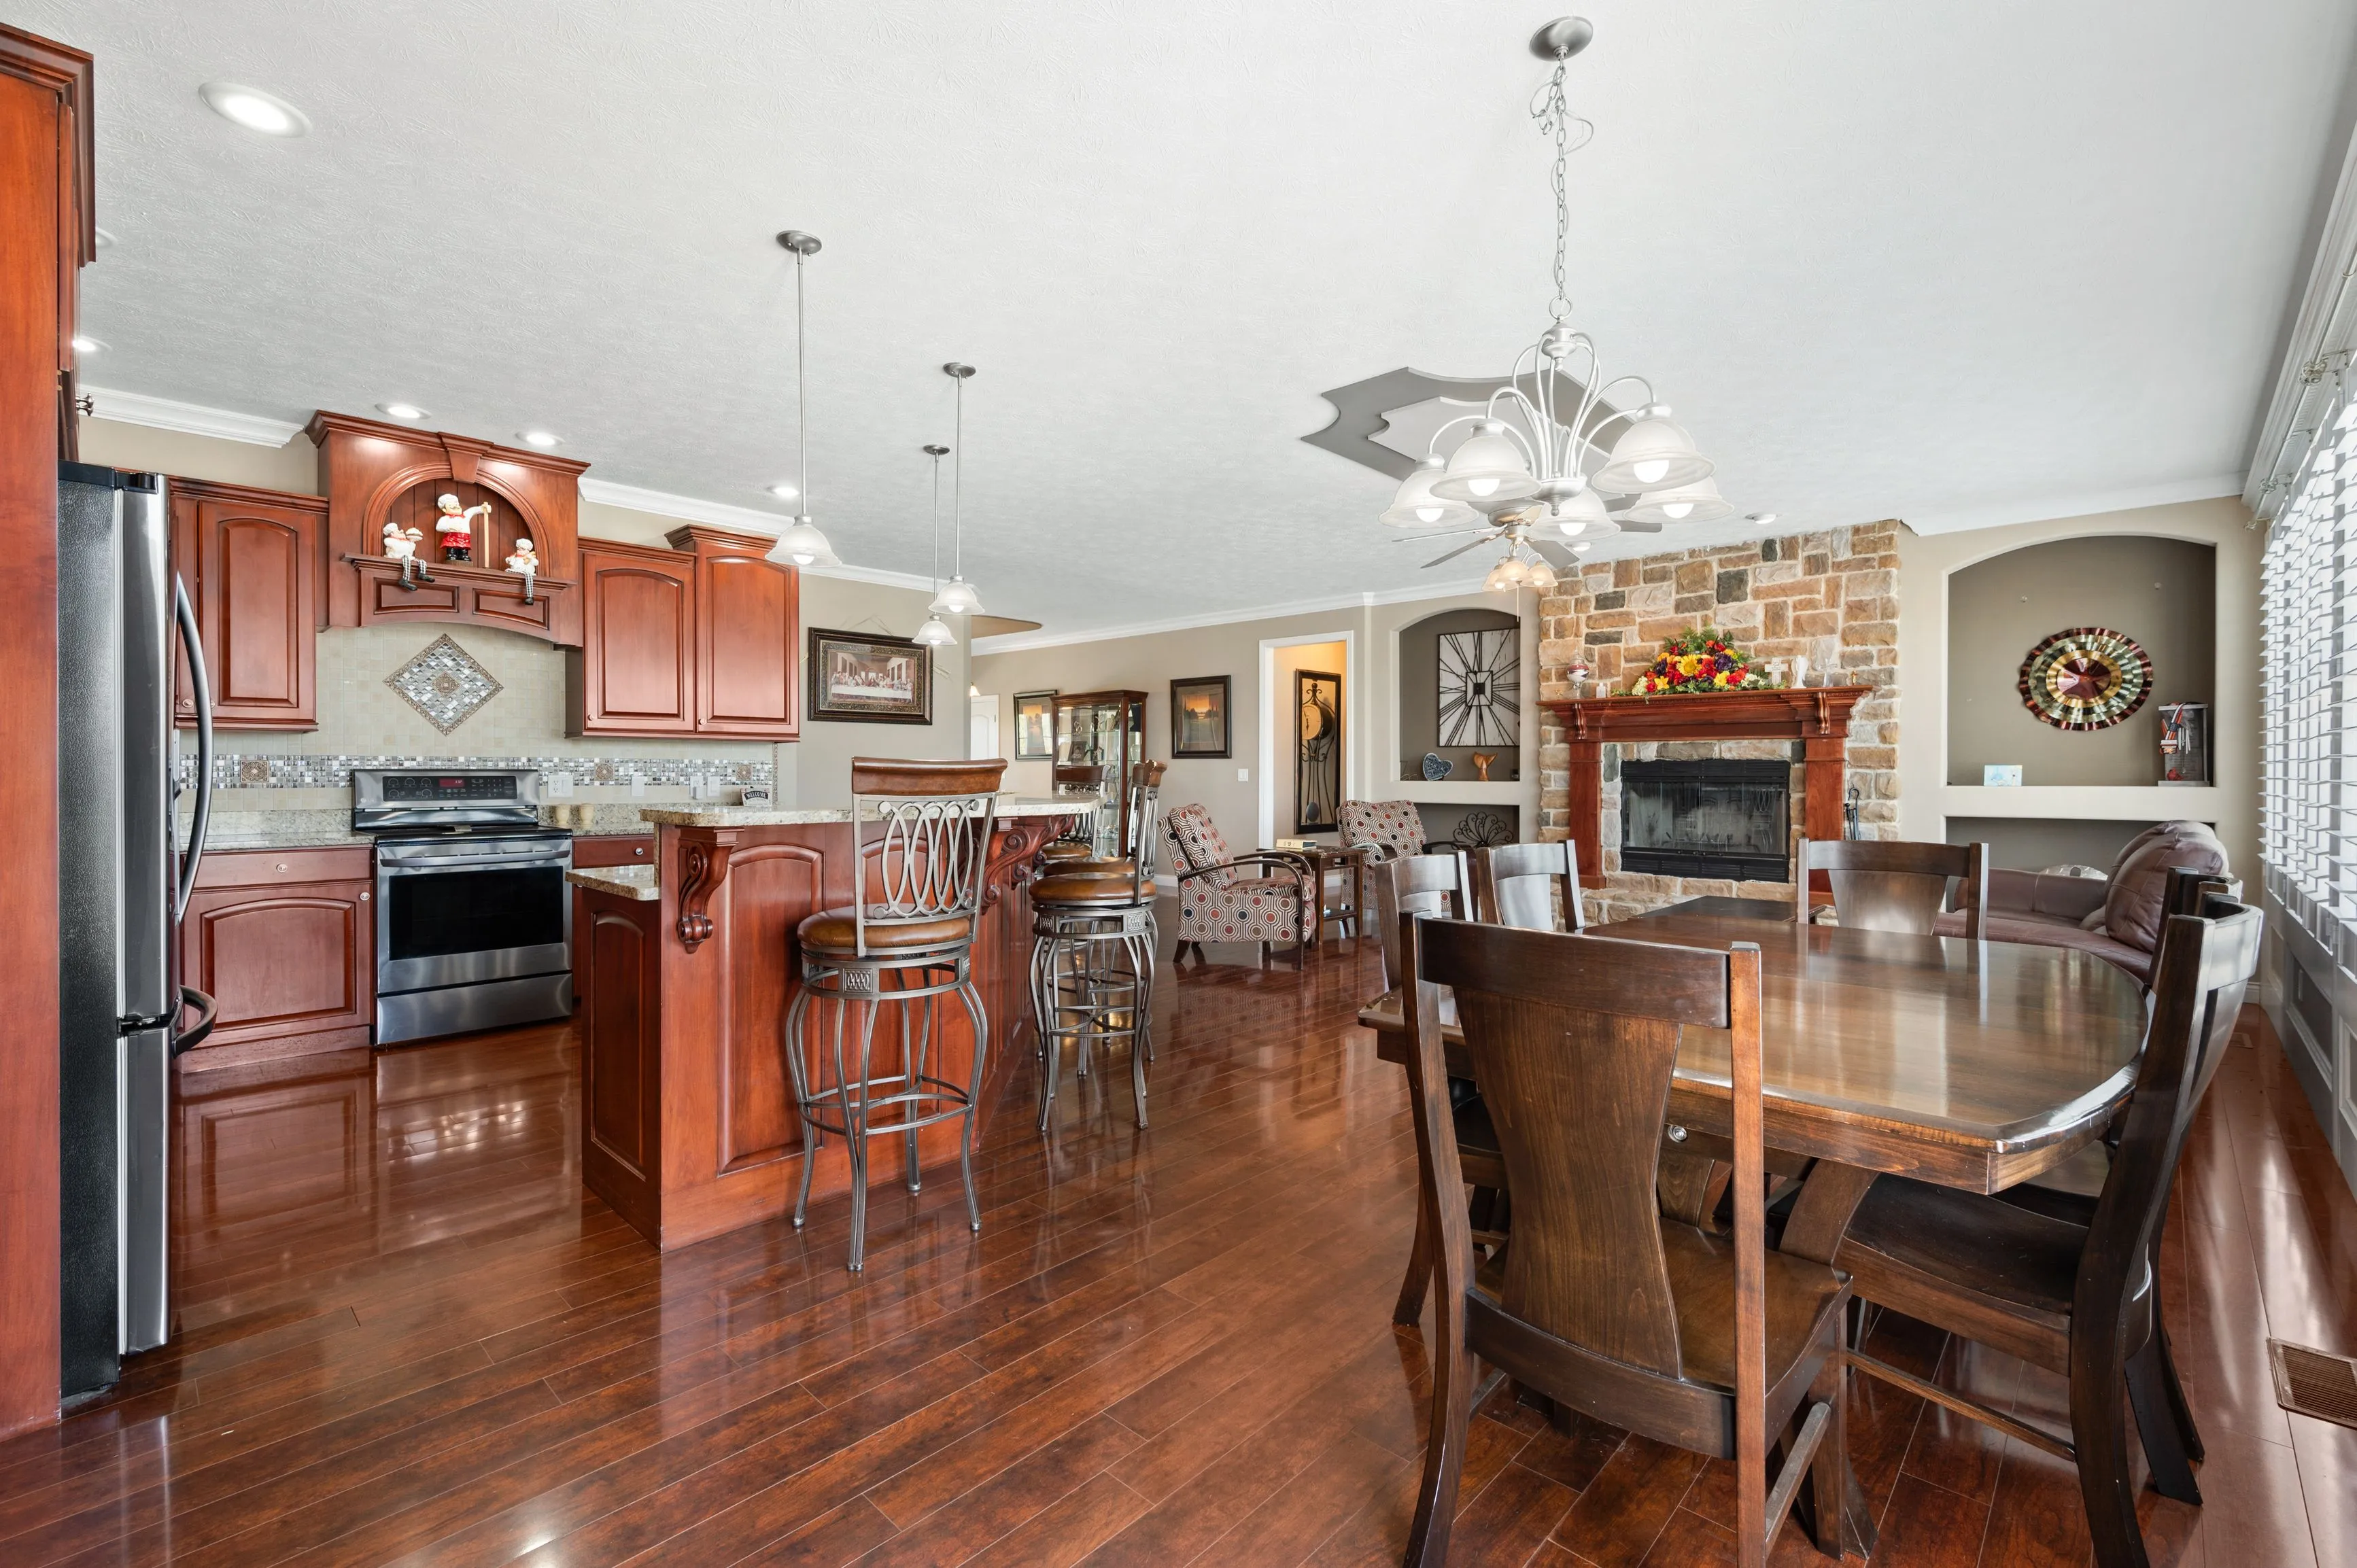 Spacious kitchen with wooden flooring, stainless steel appliances, wooden cabinets, and a dining area with a large table and chairs.